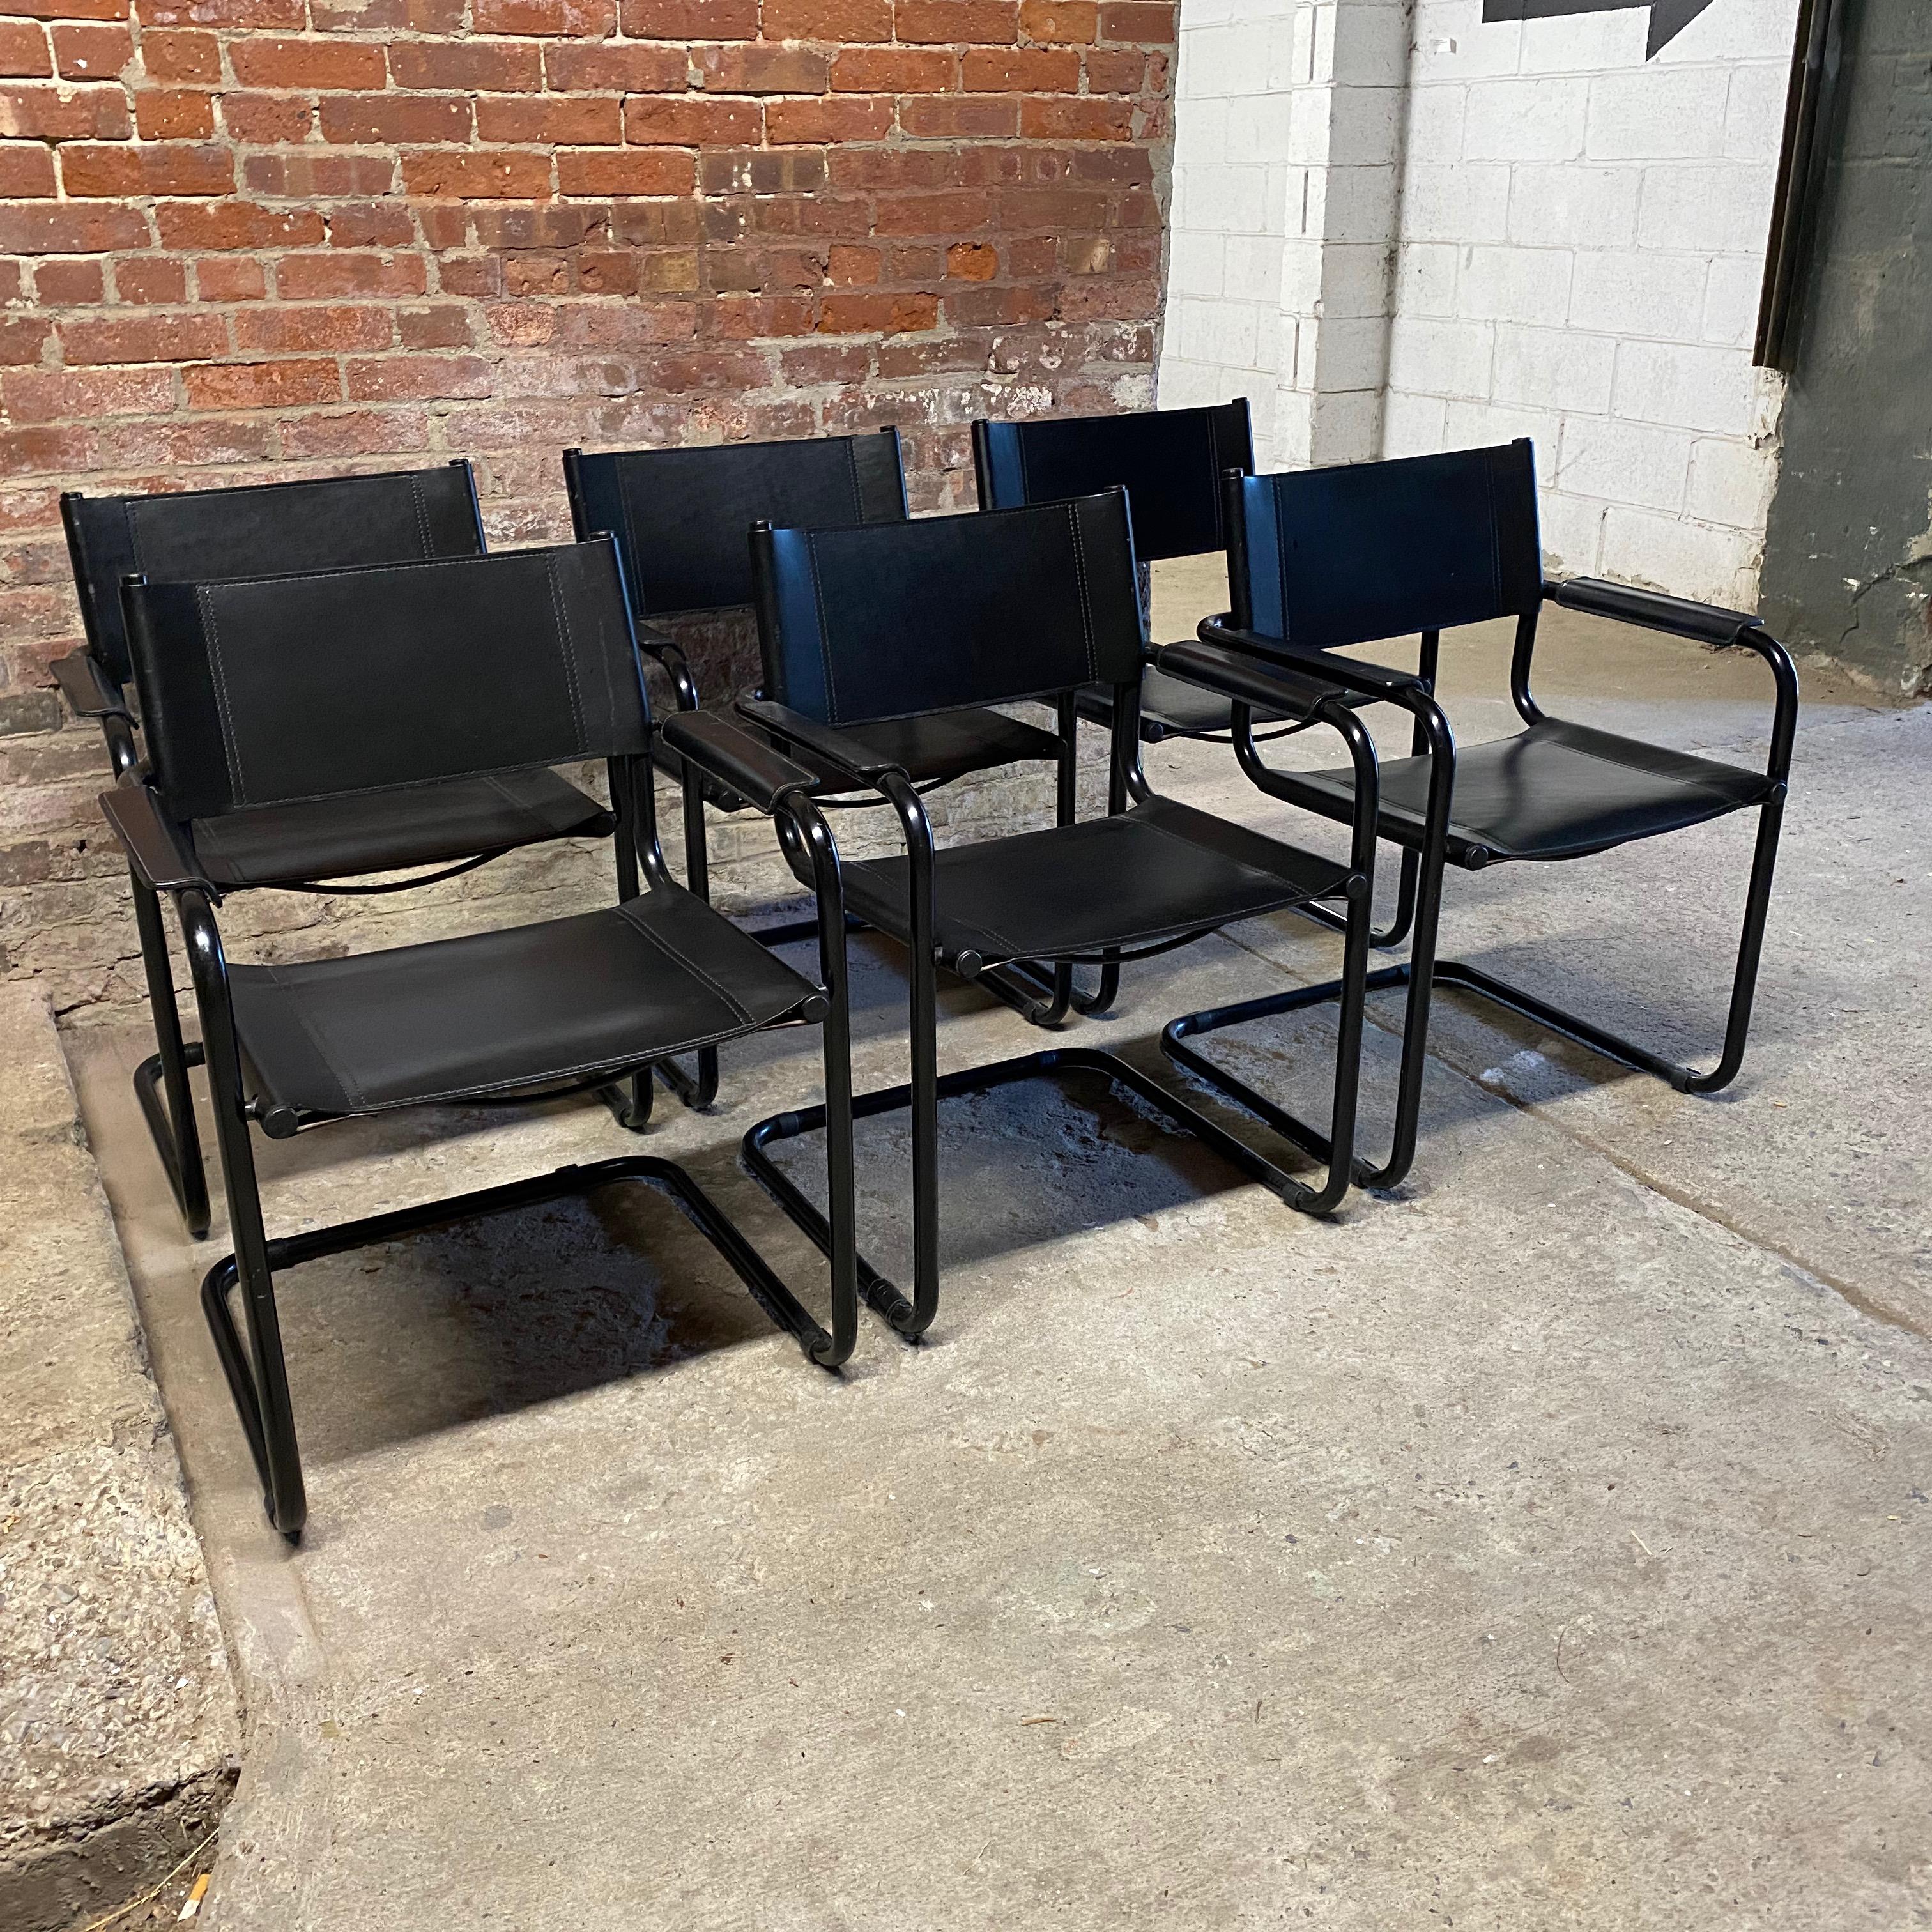 Set of six Matteo Grassi style MG5 cantilever chairs. Thick hard black leather sling backs and seats with a contoured arm rest. The original design, by Marcel Breuer has often been reproduced, but not like the quality of the Grassi chairs. Black